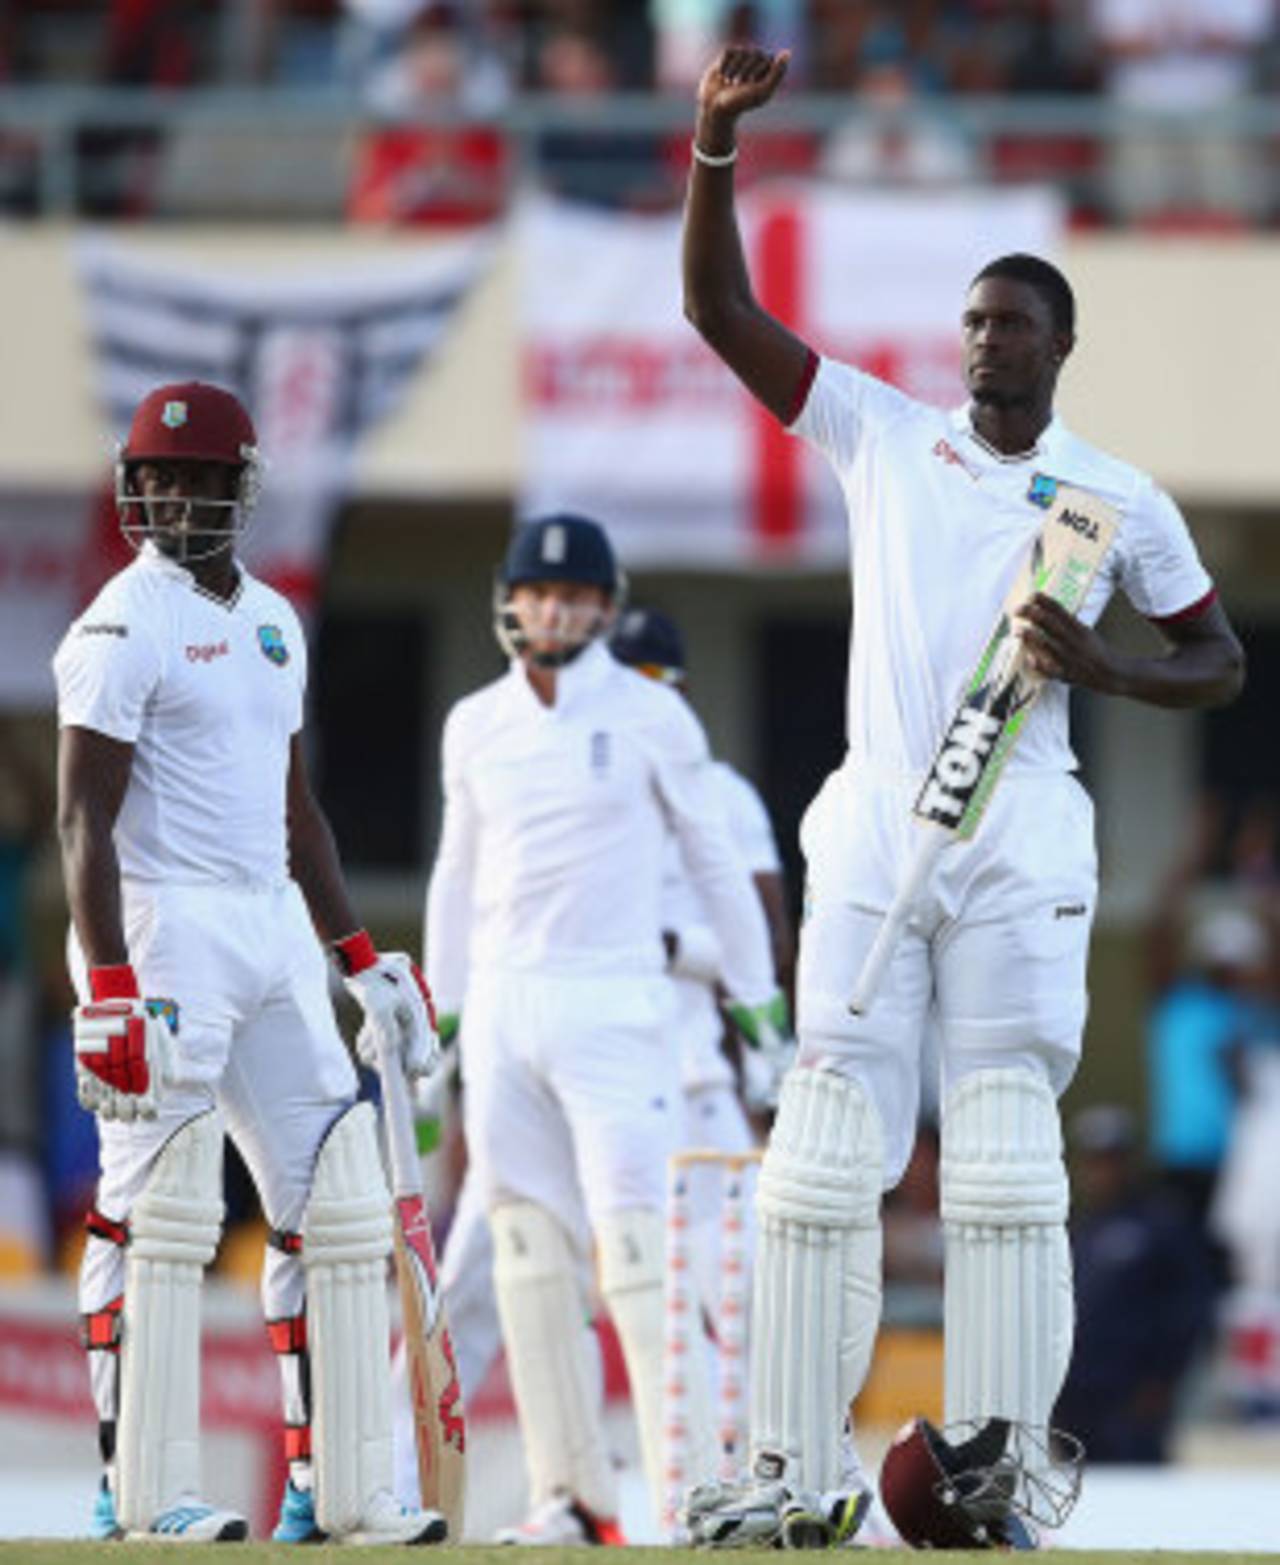 Jason Holder quietly celebrates a magnificent maiden Test, and first-class, century that helped West Indies draw the Test&nbsp;&nbsp;&bull;&nbsp;&nbsp;Getty Images